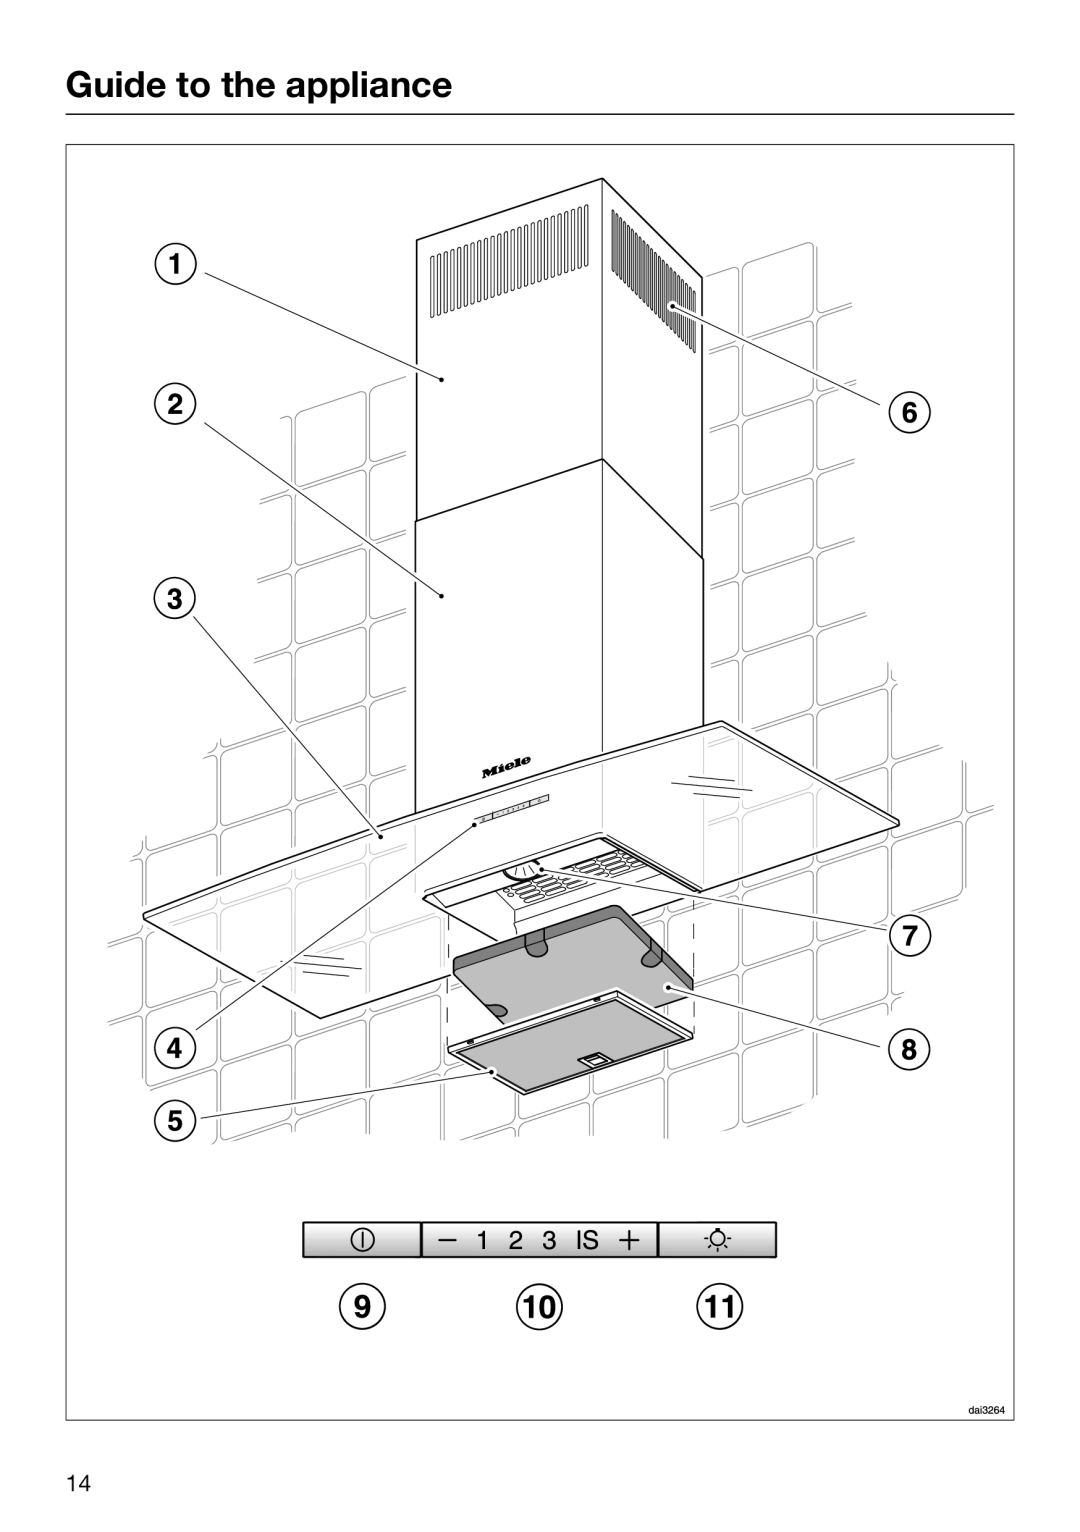 Miele 09 968 280 installation instructions Guide to the appliance 